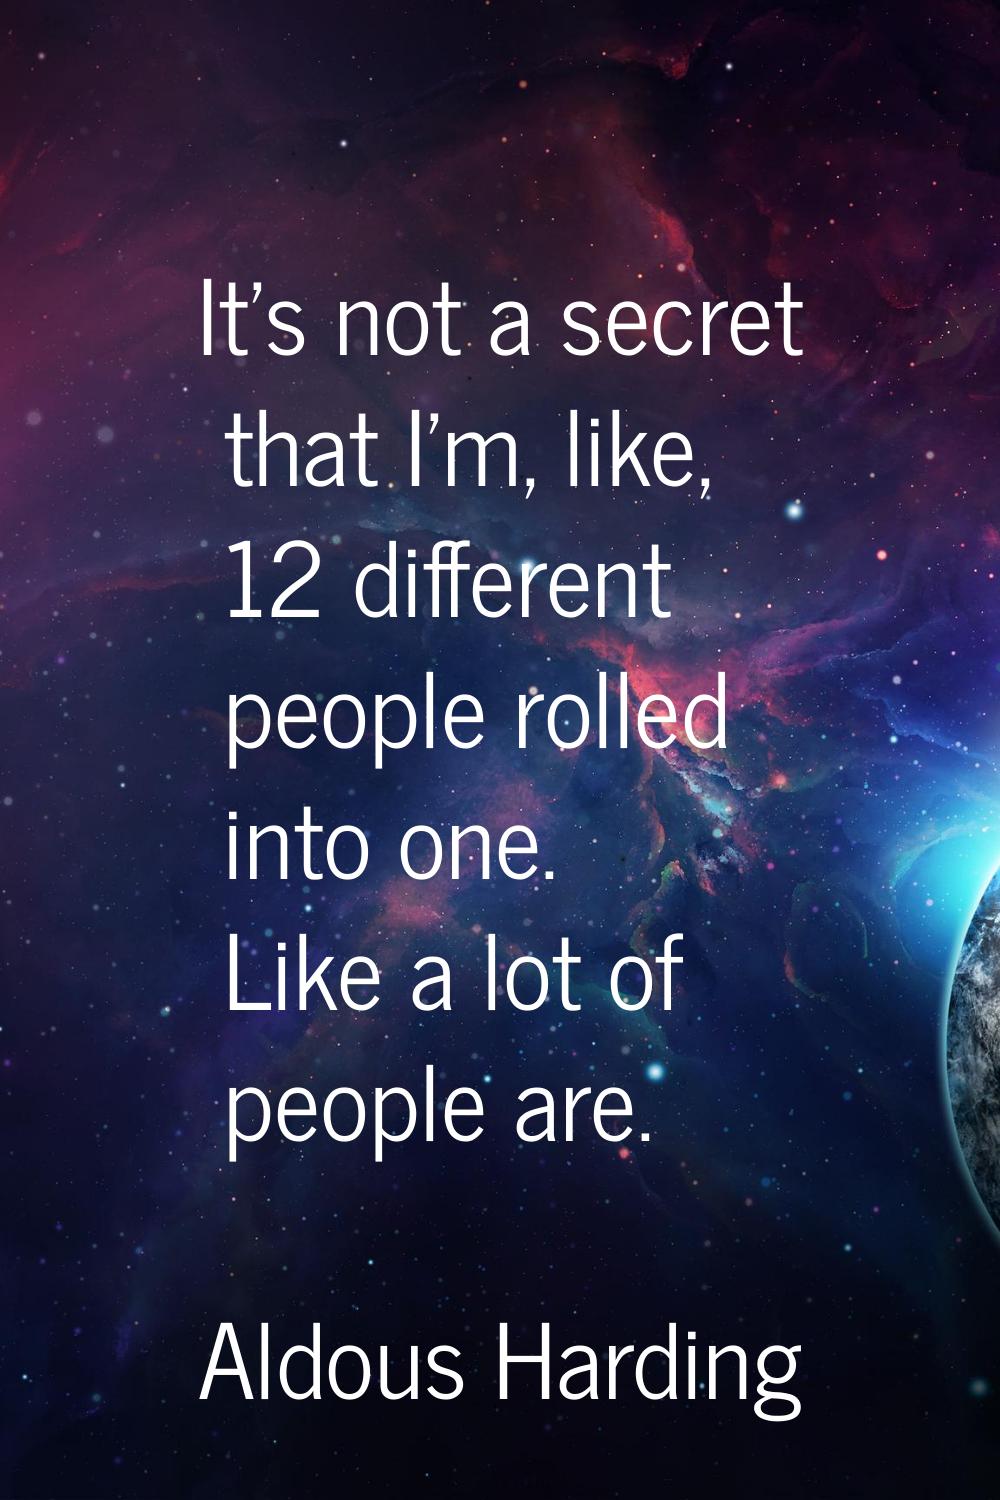 It's not a secret that I'm, like, 12 different people rolled into one. Like a lot of people are.